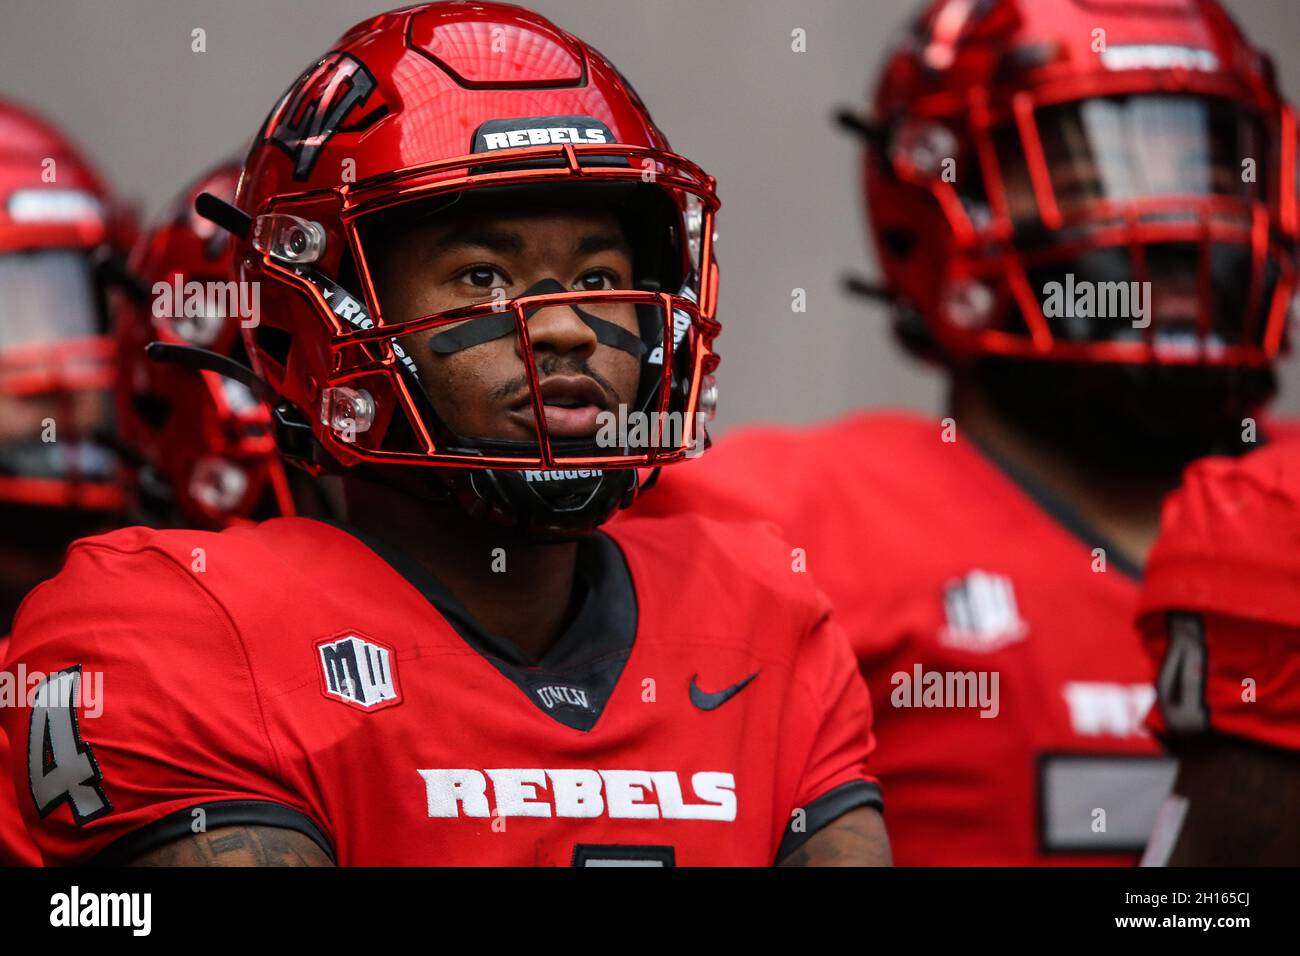 Las Vegas, NV, USA. 16th Oct, 2021. UNLV Rebels wide receiver Steve Jenkins (4) waits to be introduced prior to the start of the NCAA football game featuring the Utah State Aggies and the UNLV Rebels at Allegiant Stadium in Las Vegas, NV. Christopher Trim/CSM/Alamy Live News Stock Photo